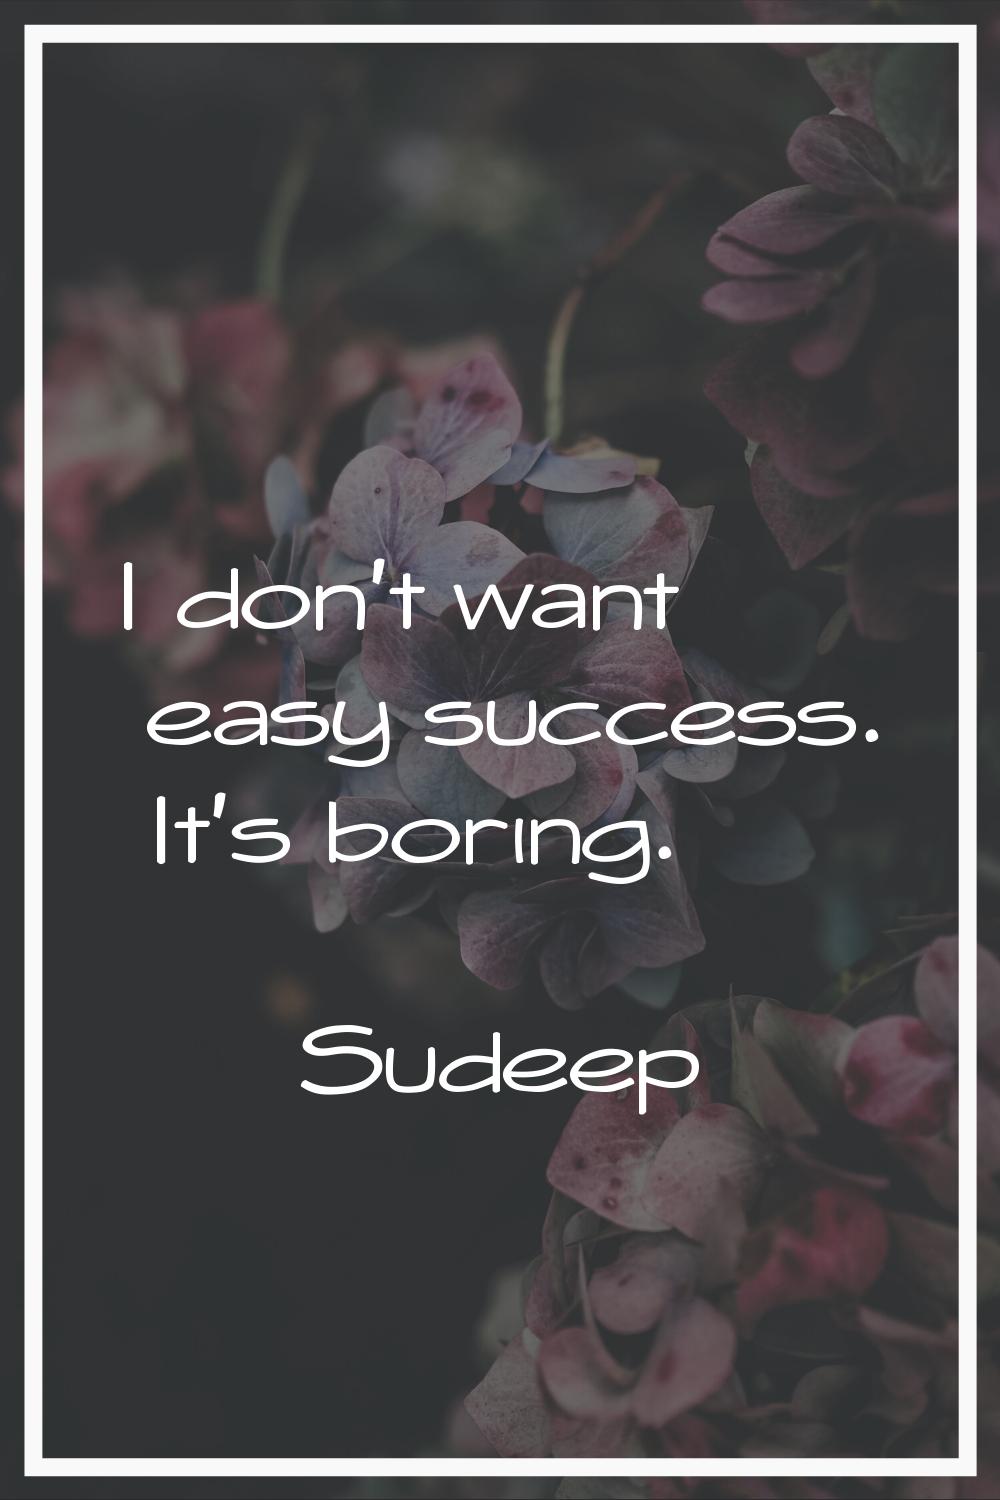 I don't want easy success. It's boring.